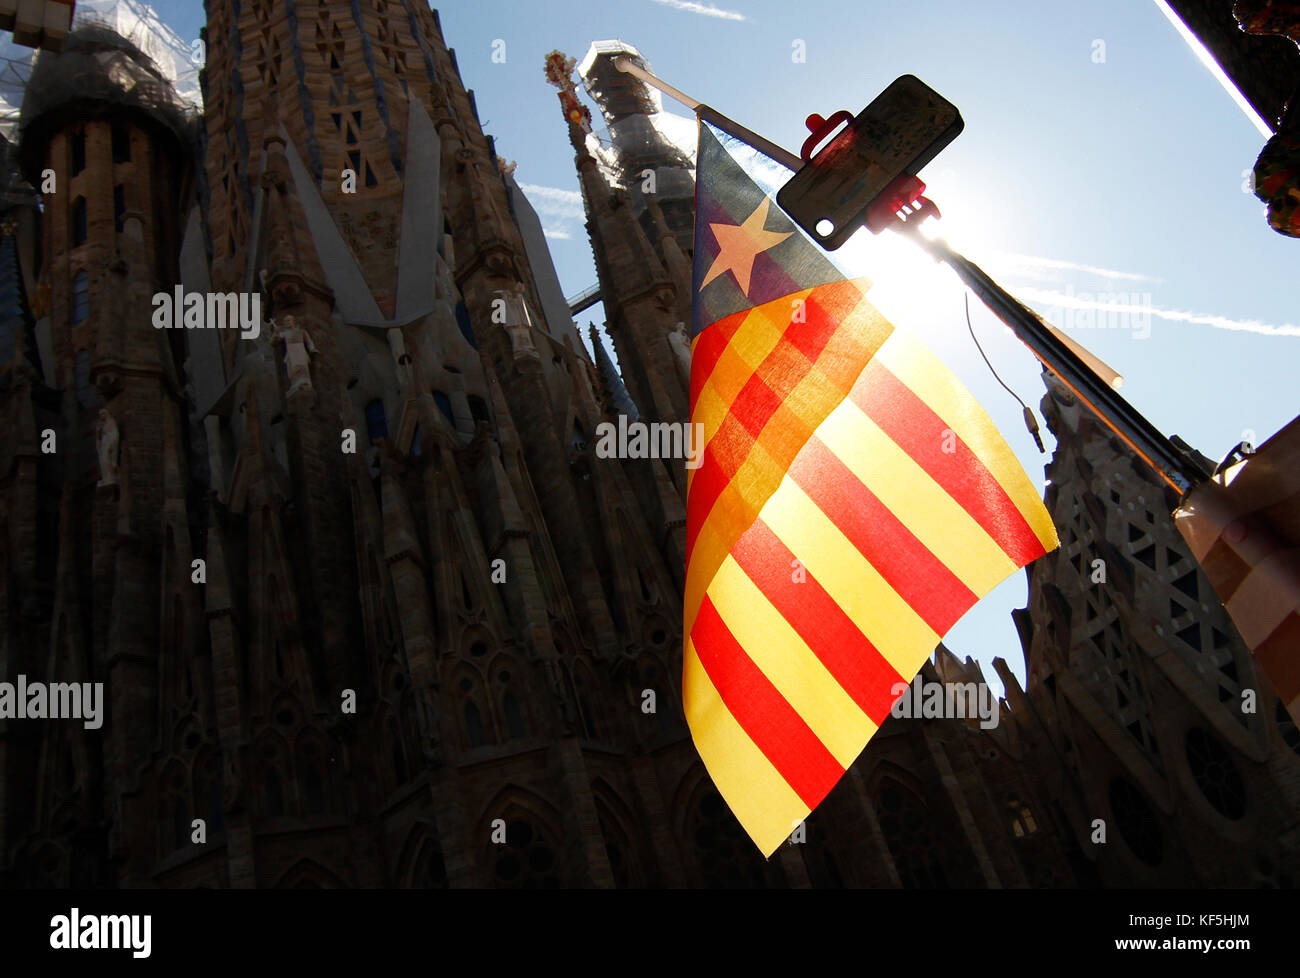 The Estelada the flag pro independence of Catalonia waving in front of the Sagrada Familia of Gaudi, in Barcelona Stock Photo